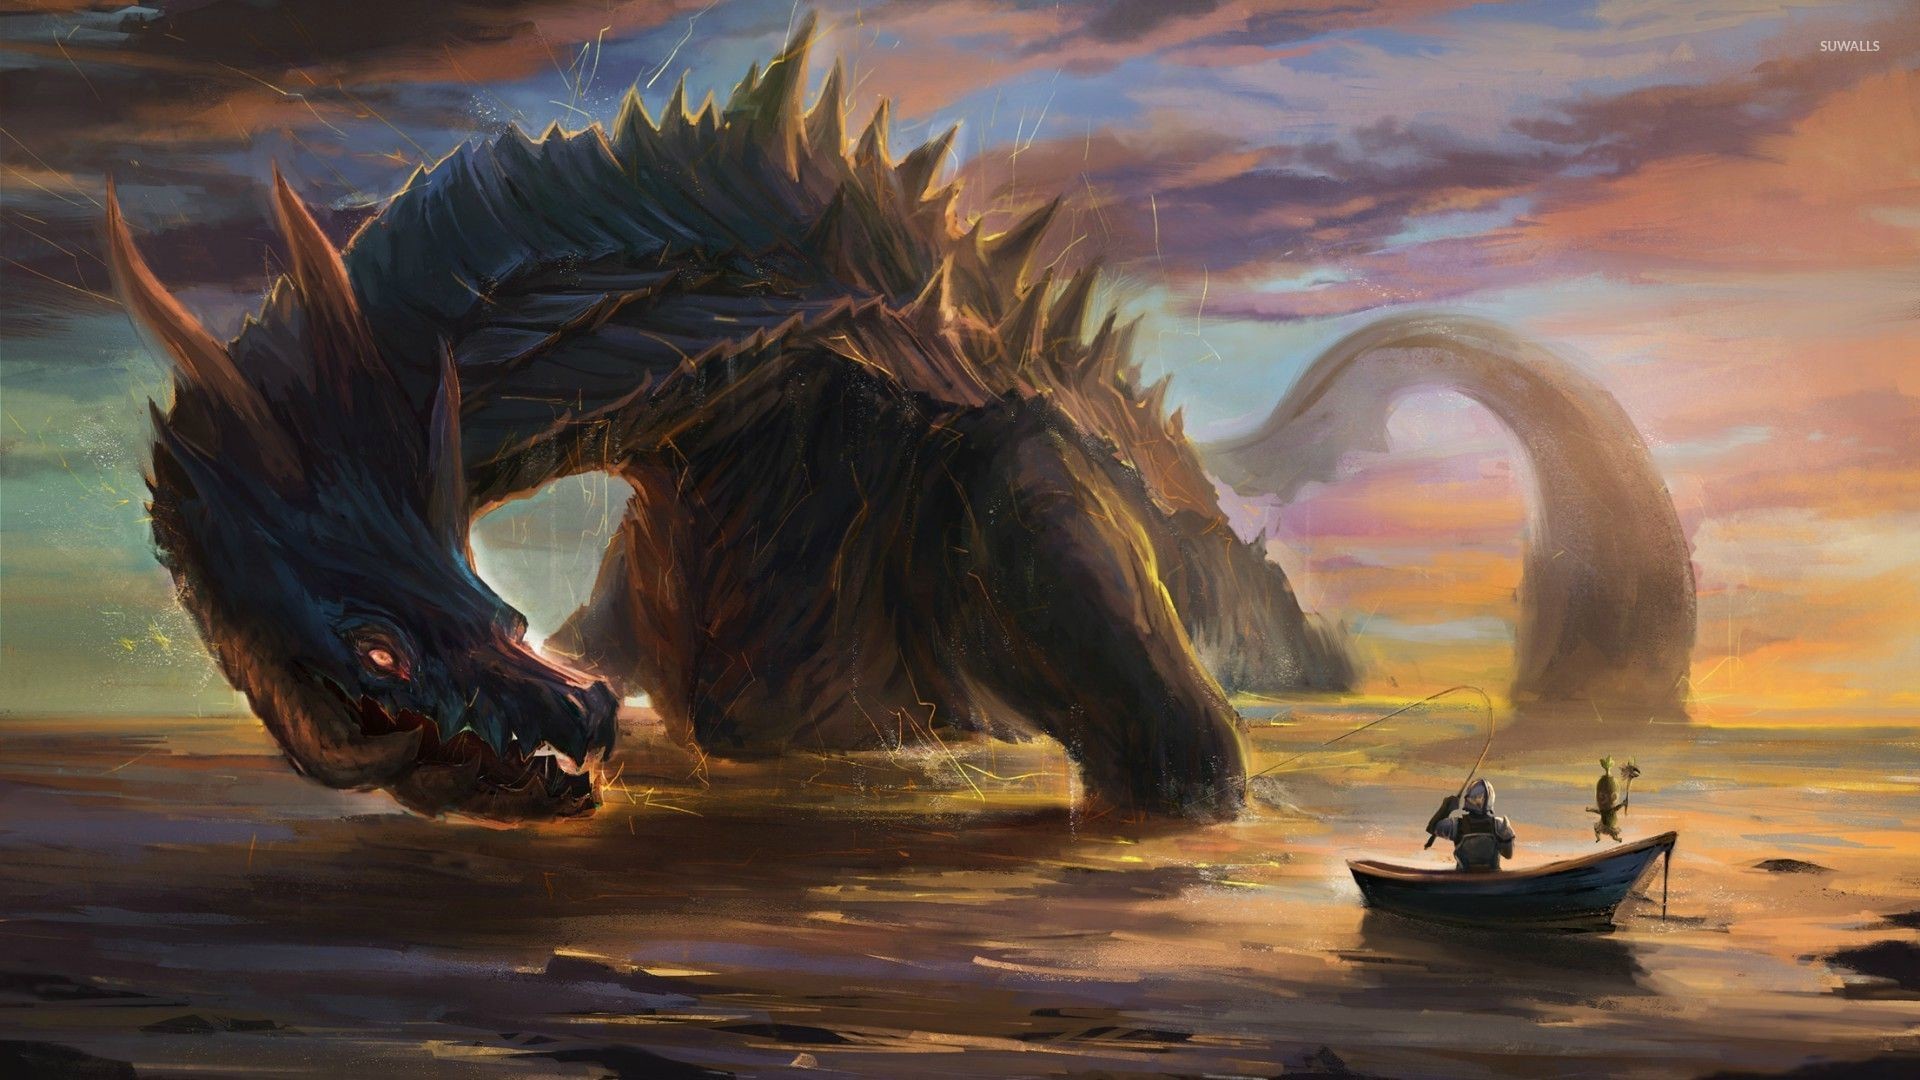 1920x1080 Warrior in a small boat fishing the giant dragon wallpaper  jpg